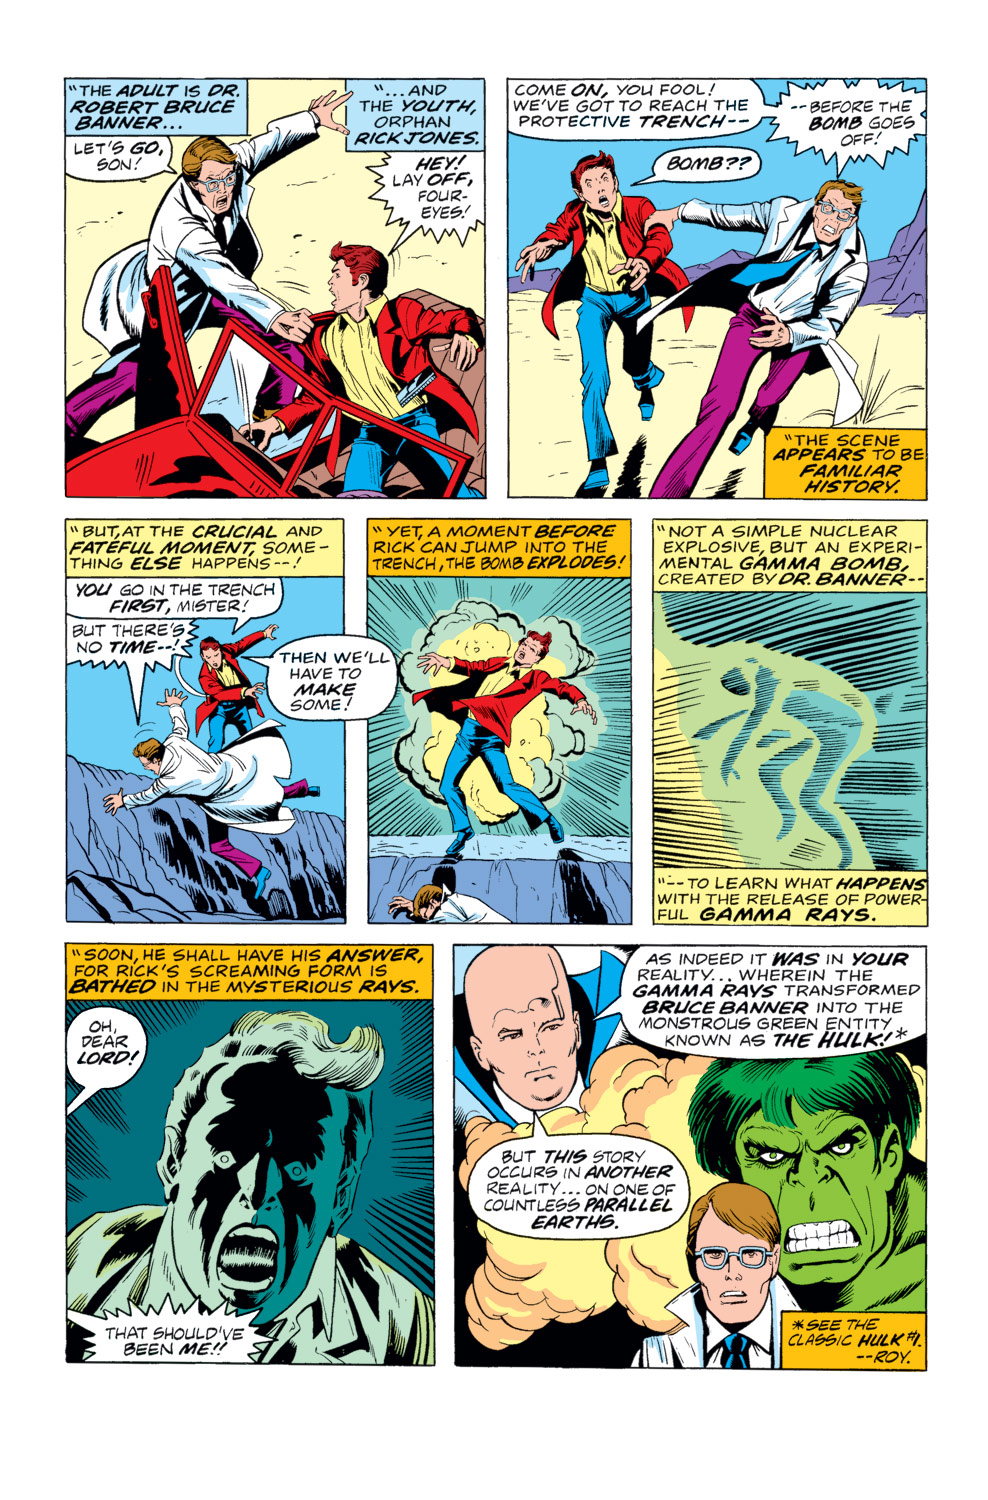 What If? (1977) issue 12 - Rick Jones had become the Hulk - Page 3